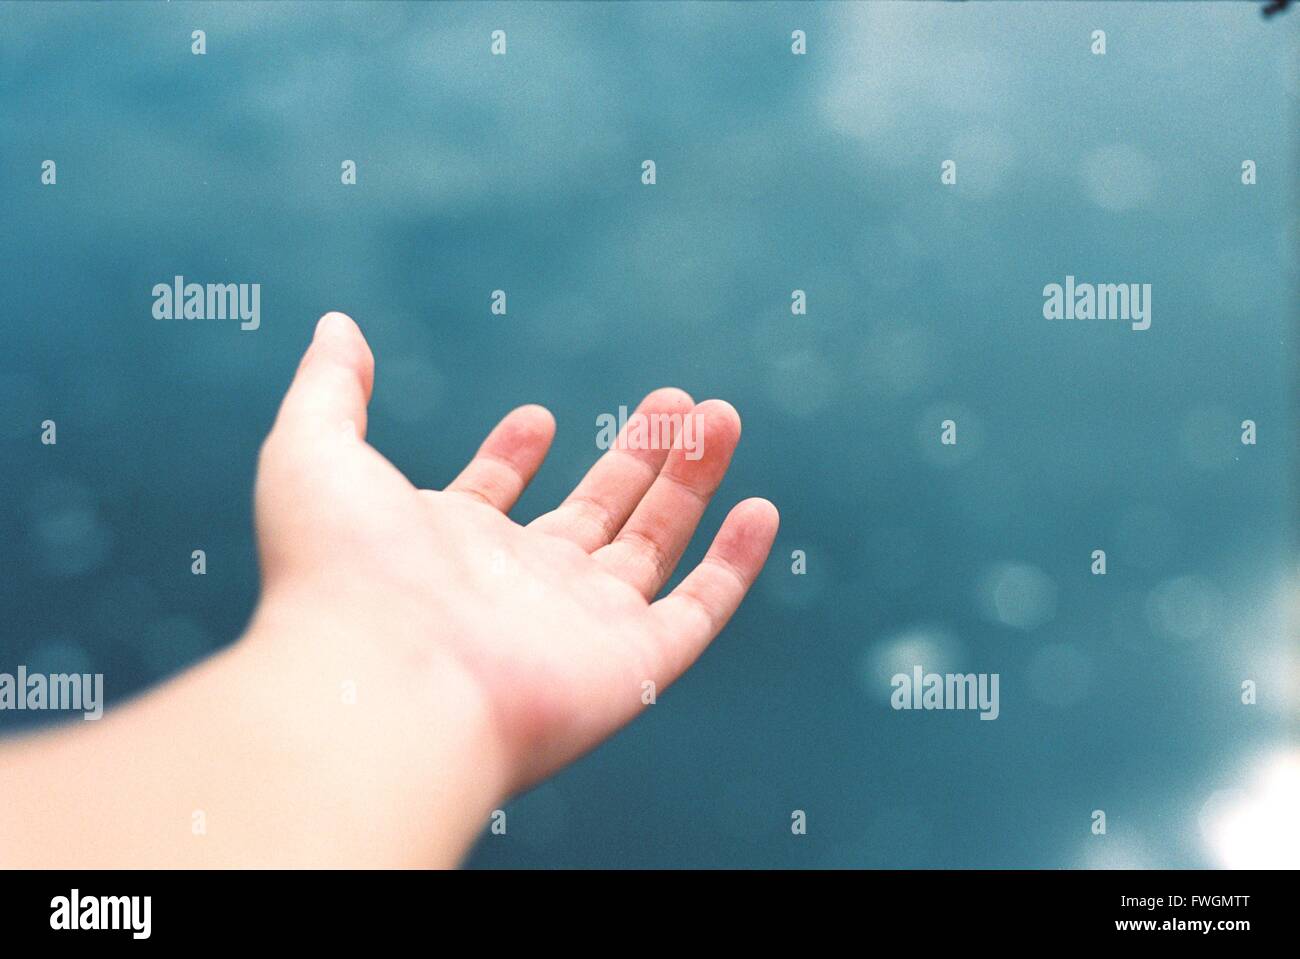 Cropped Image Of Hand Against Sea Stock Photo